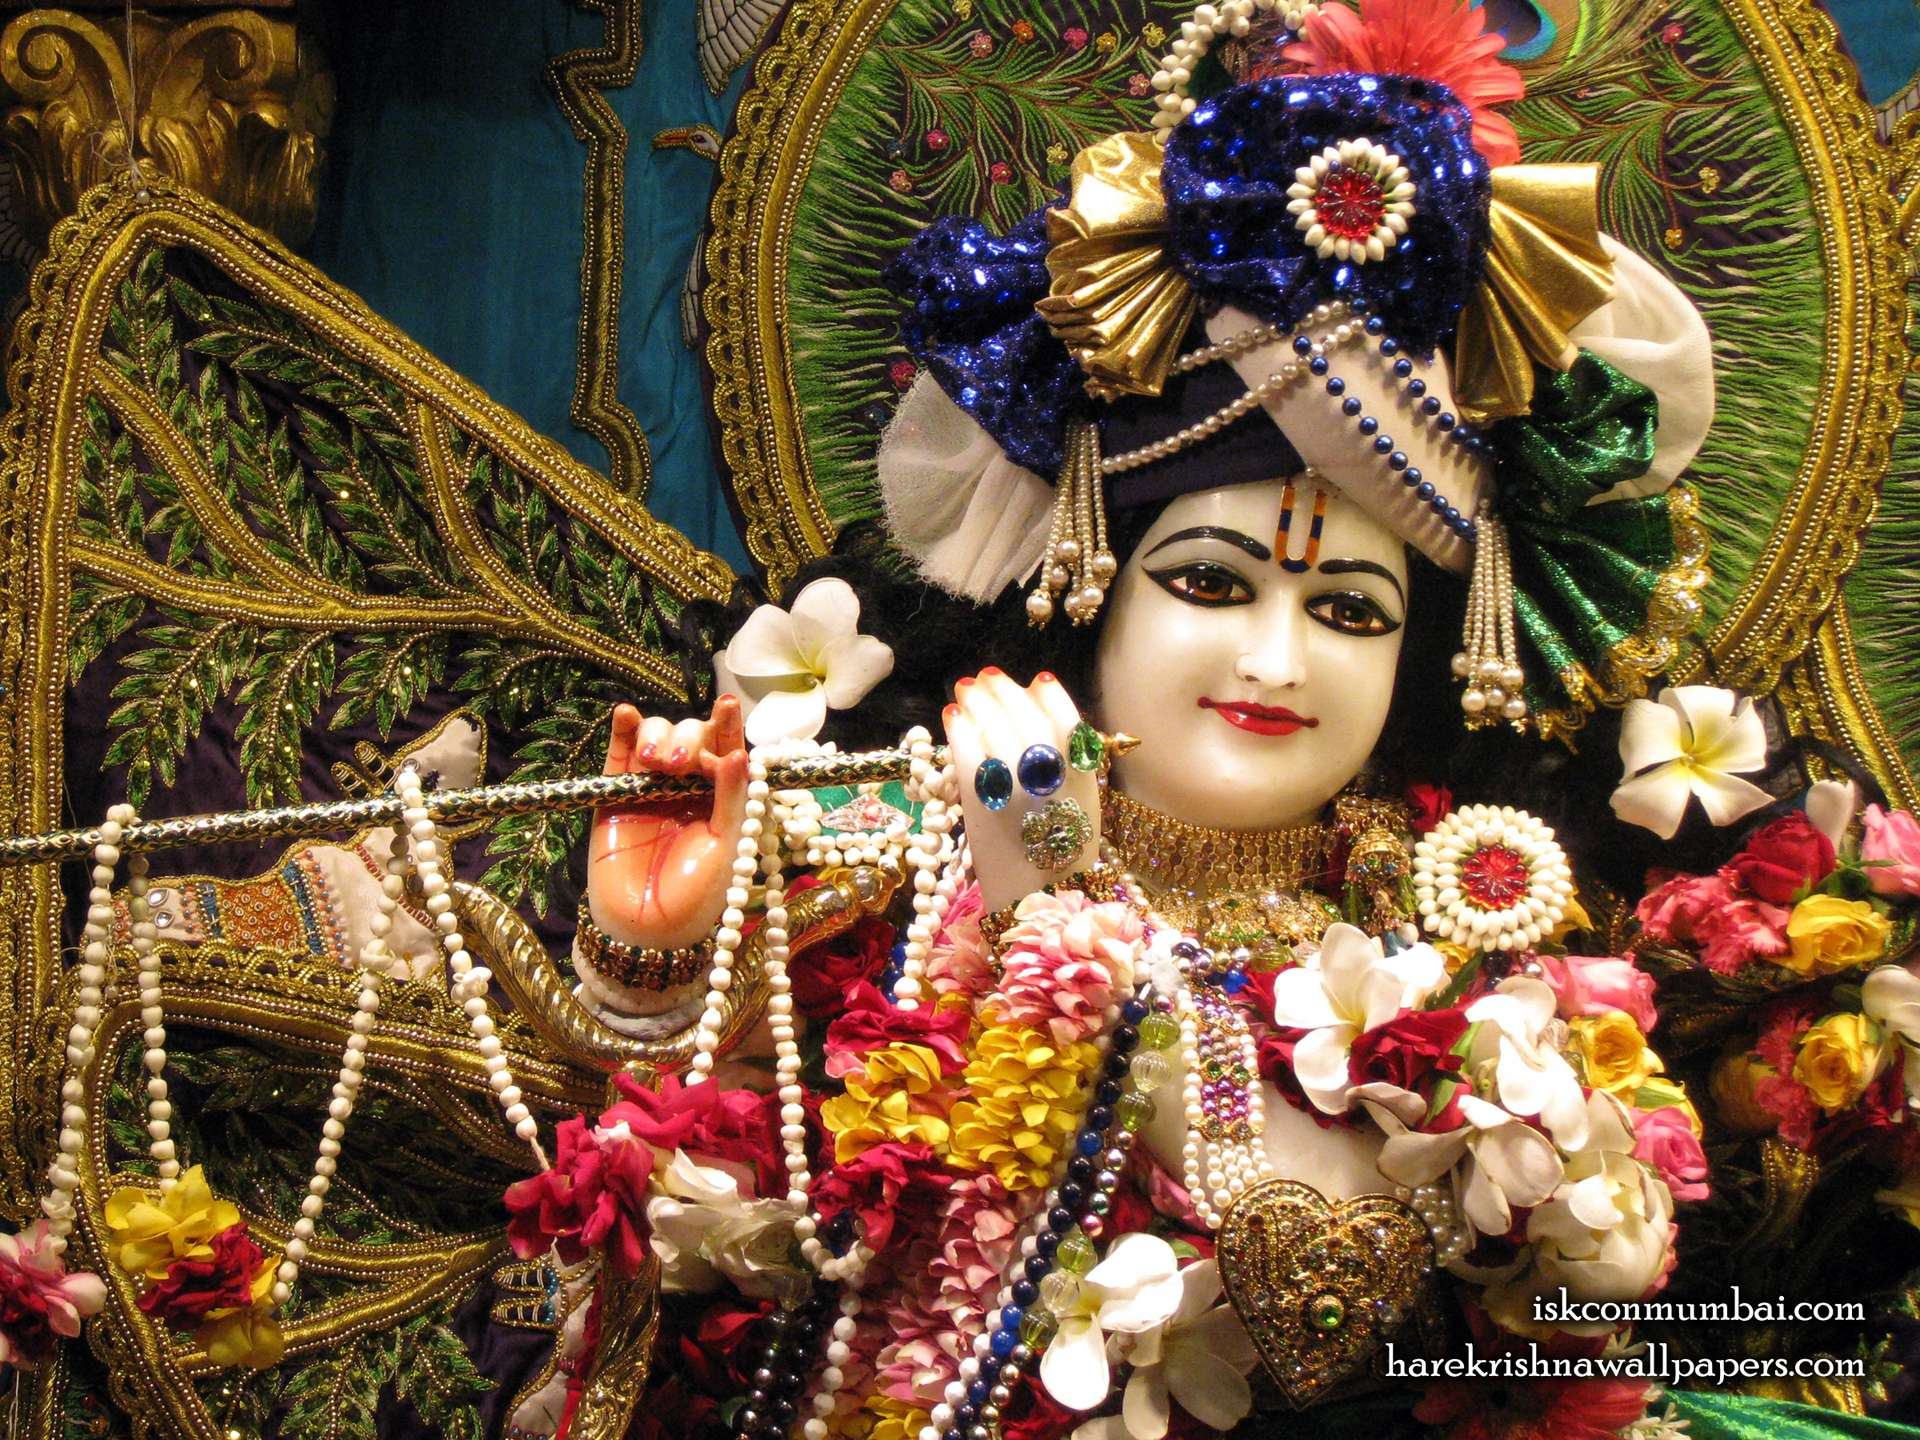  Hare Krishna Wallpapers wallpapers backgrounds Gods Images HD